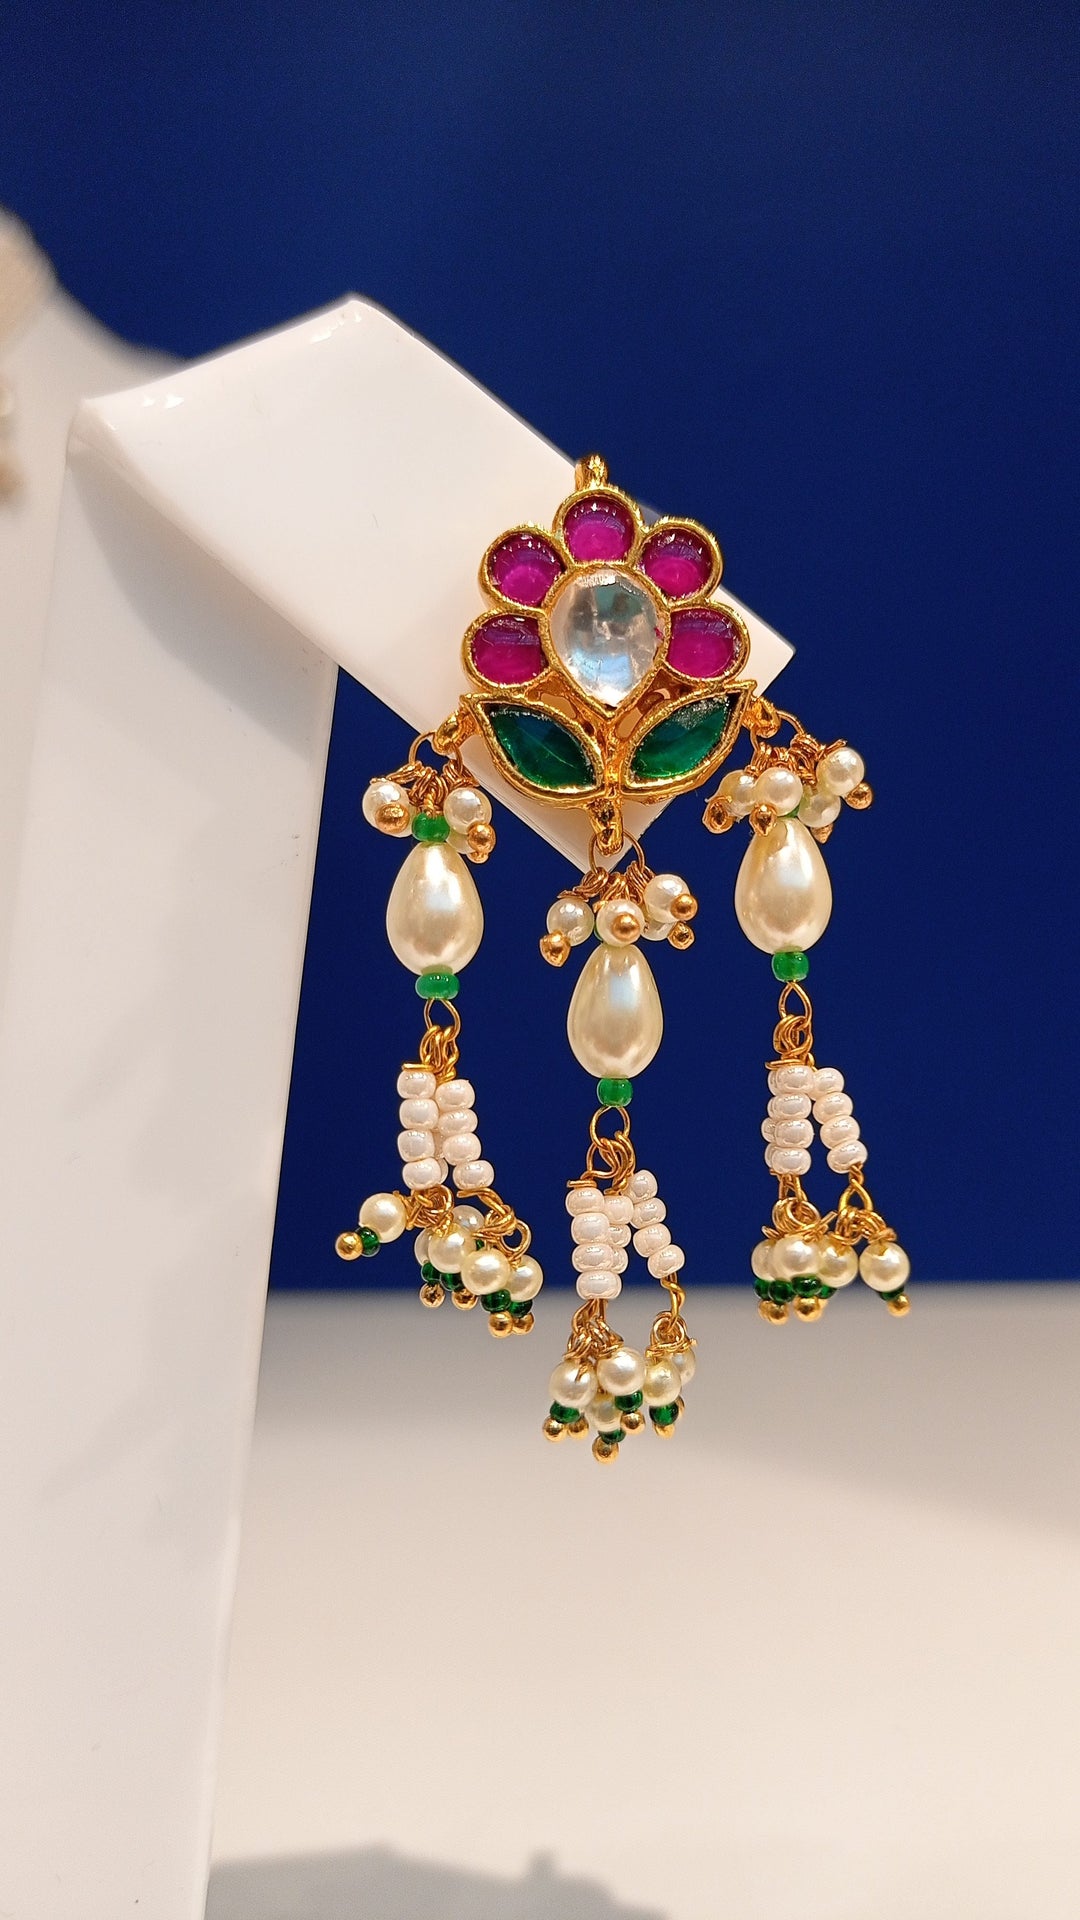 Rachna Floral White Beaded Mughal Kundan Necklace and Earrings Set